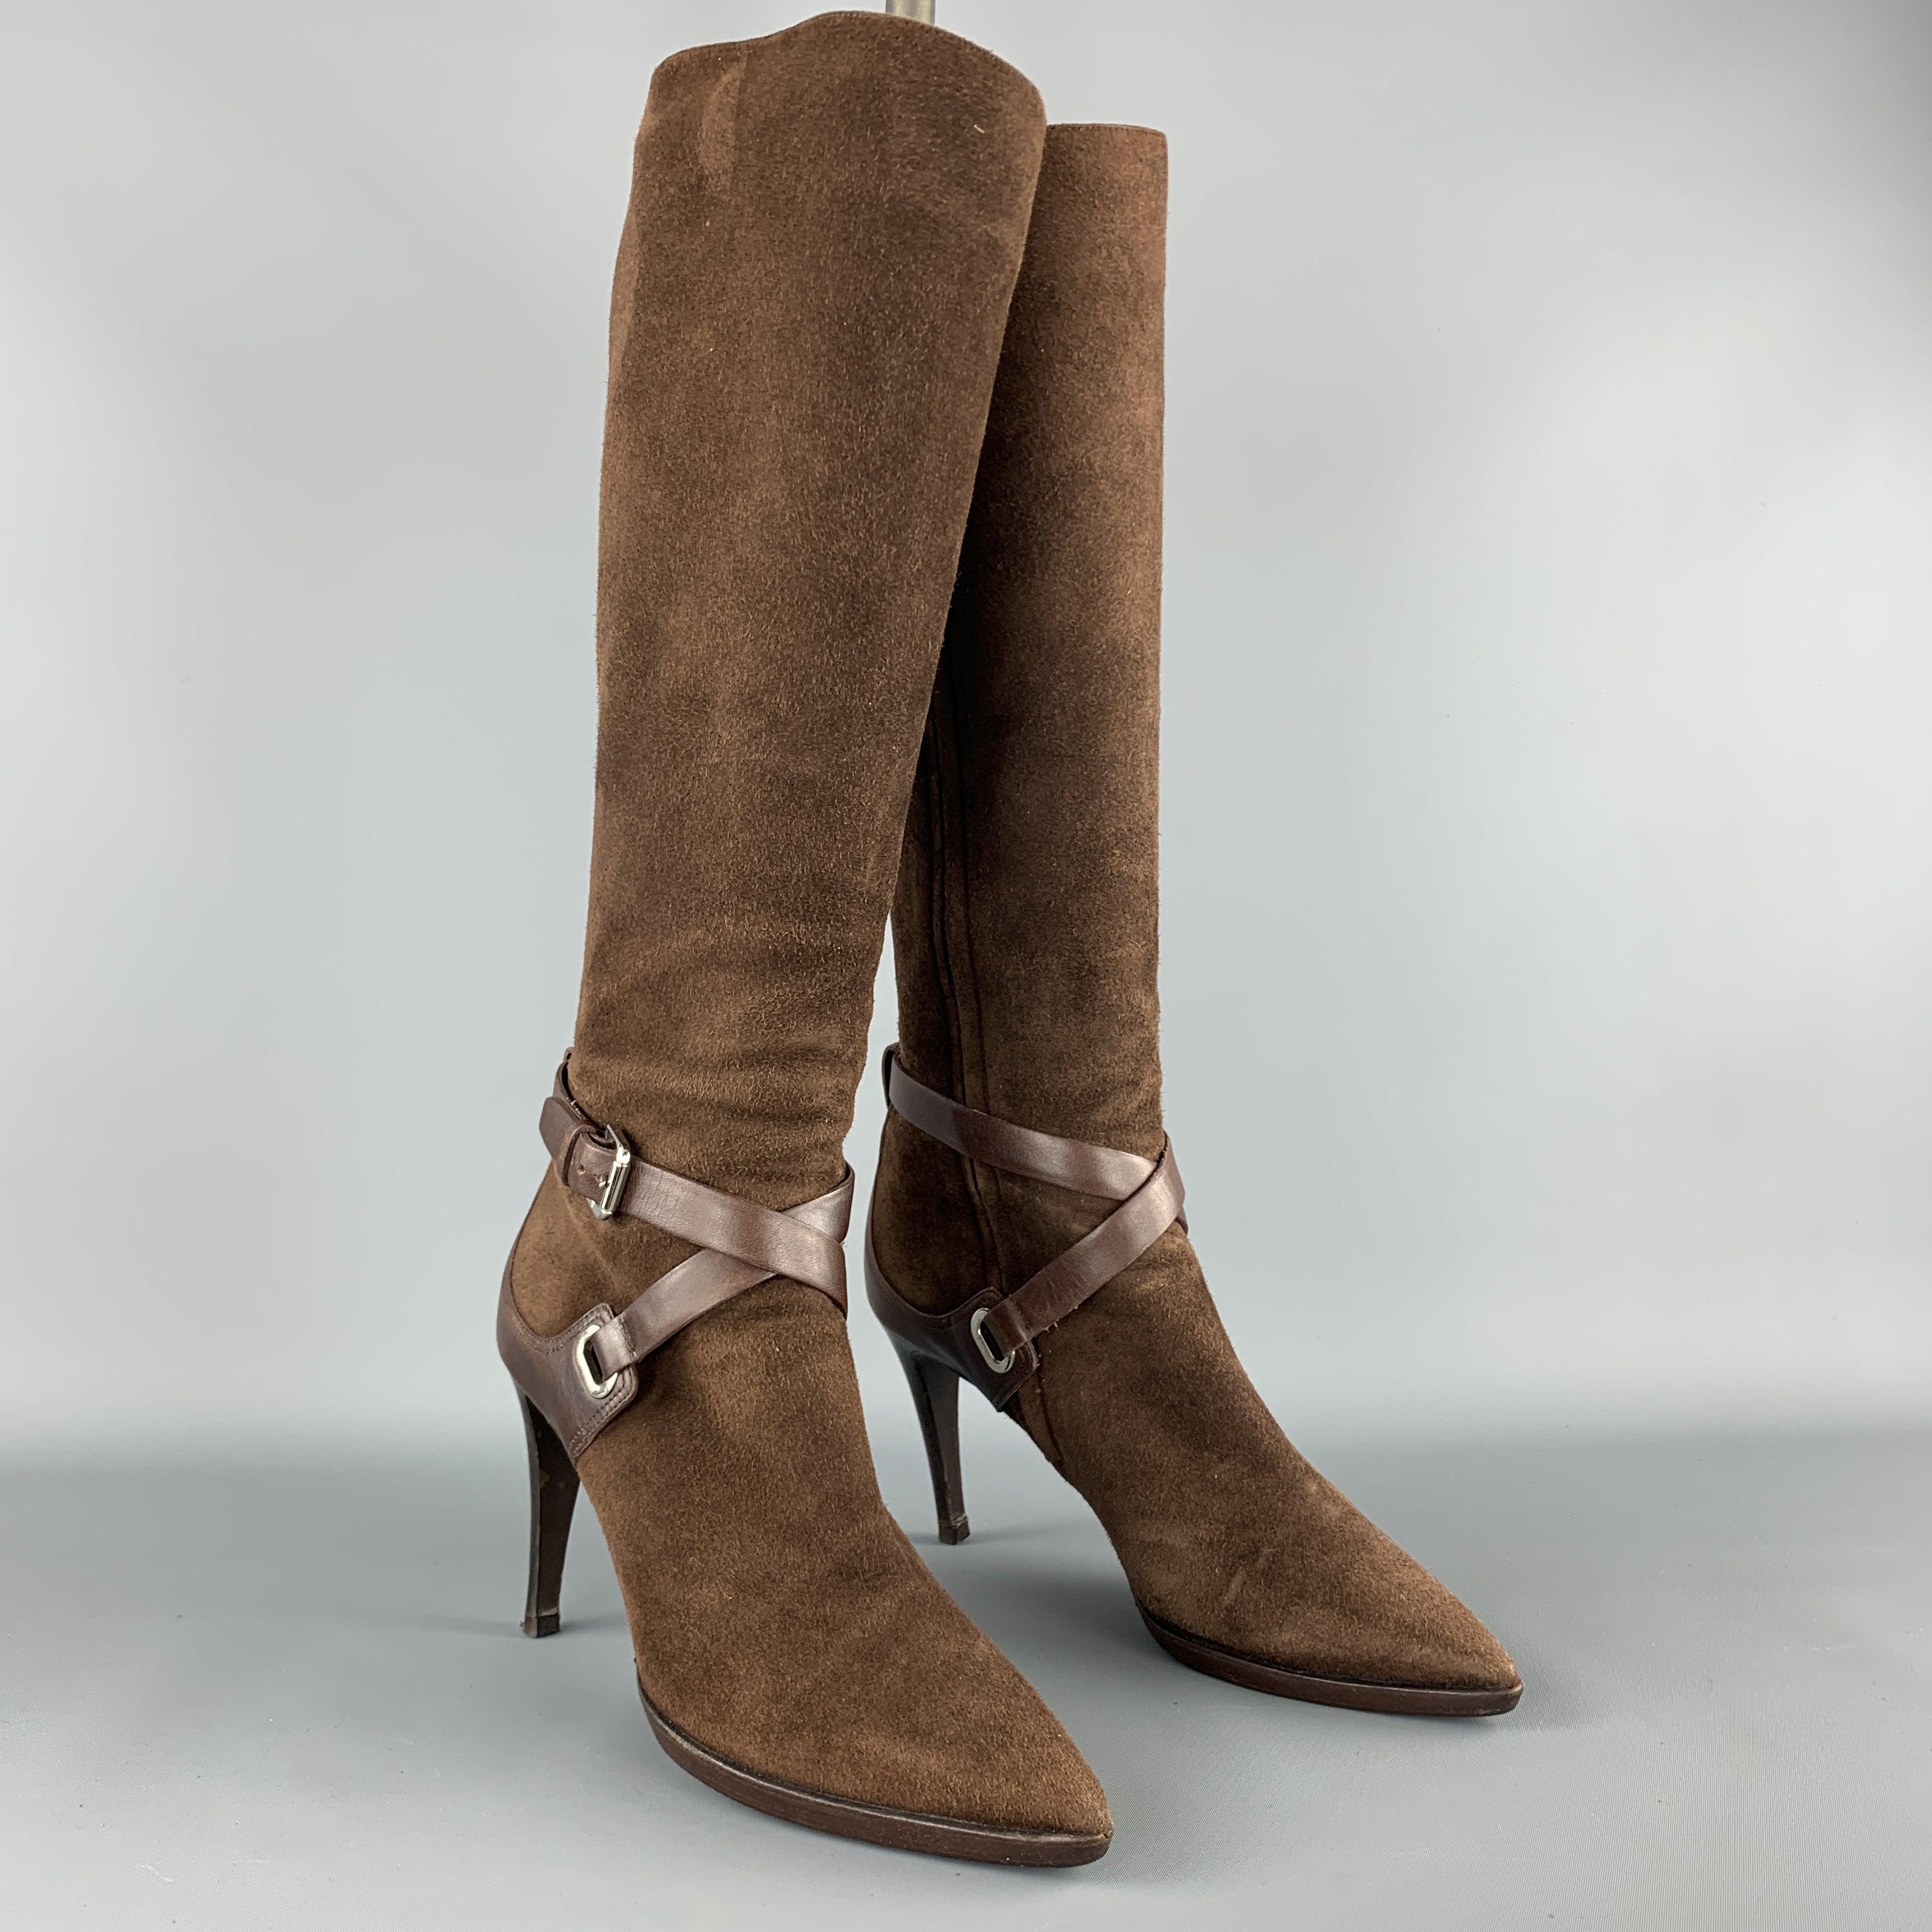 RALPH LAUREN Size 7 Brown Suede Ankle Strap Pointed Calf Boots In Good Condition For Sale In San Francisco, CA